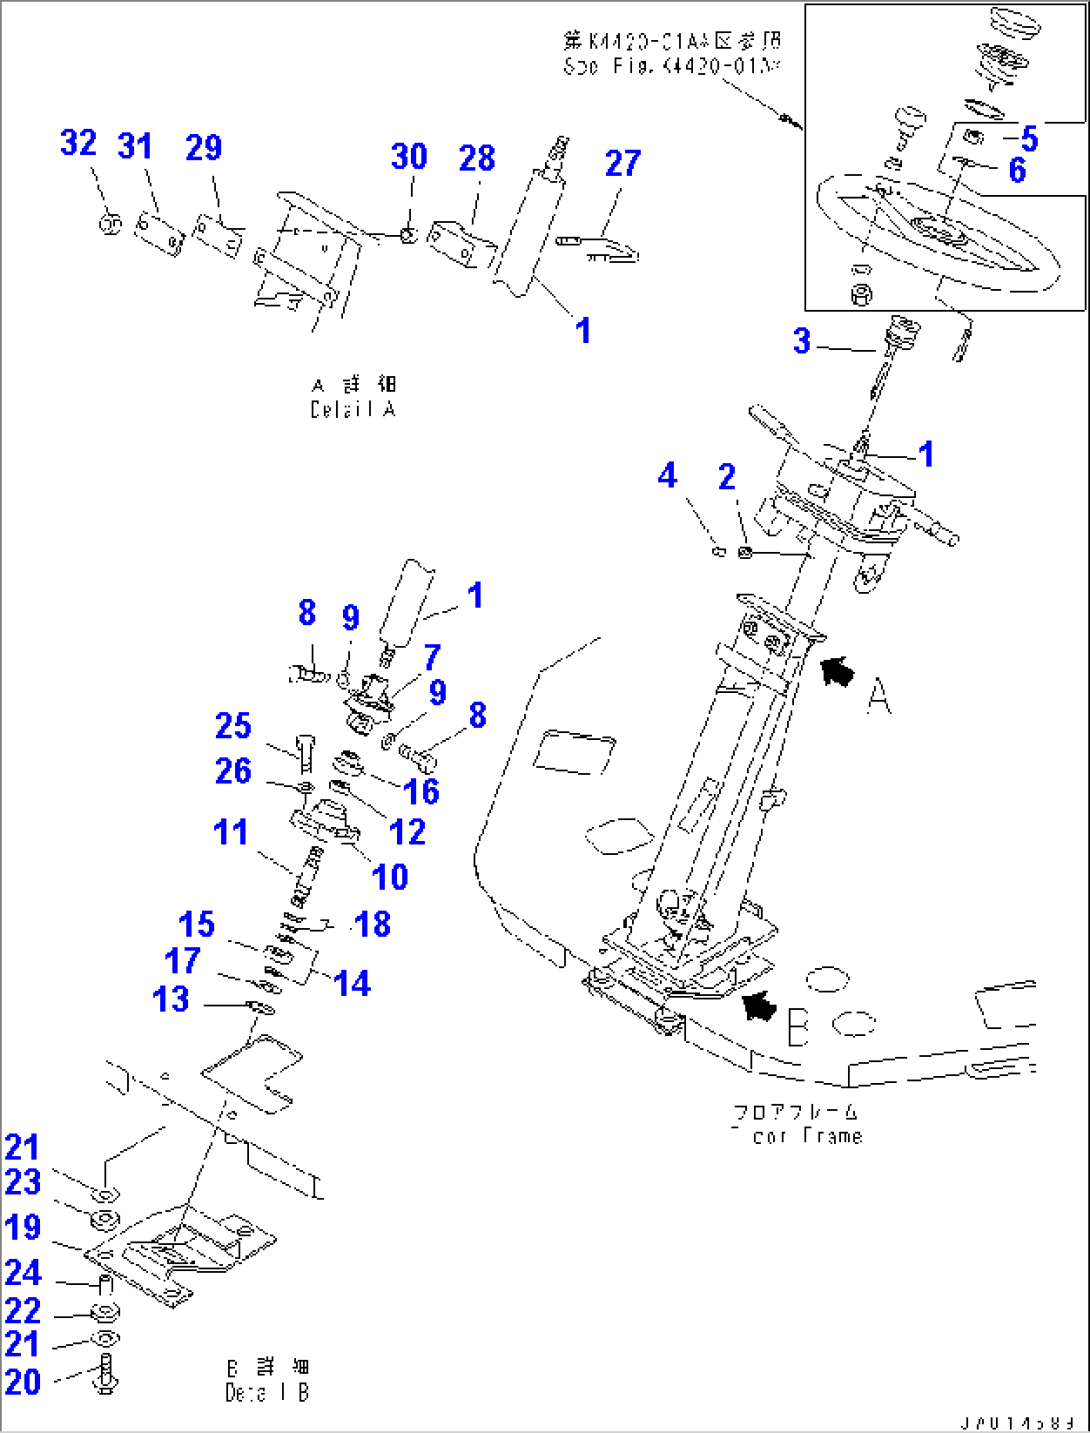 STEERING WHEEL AND COLUMN AND ORBITROL (STEERING WHEEL AND COLUMN) (FOR 4-SPEED)(#54095-)